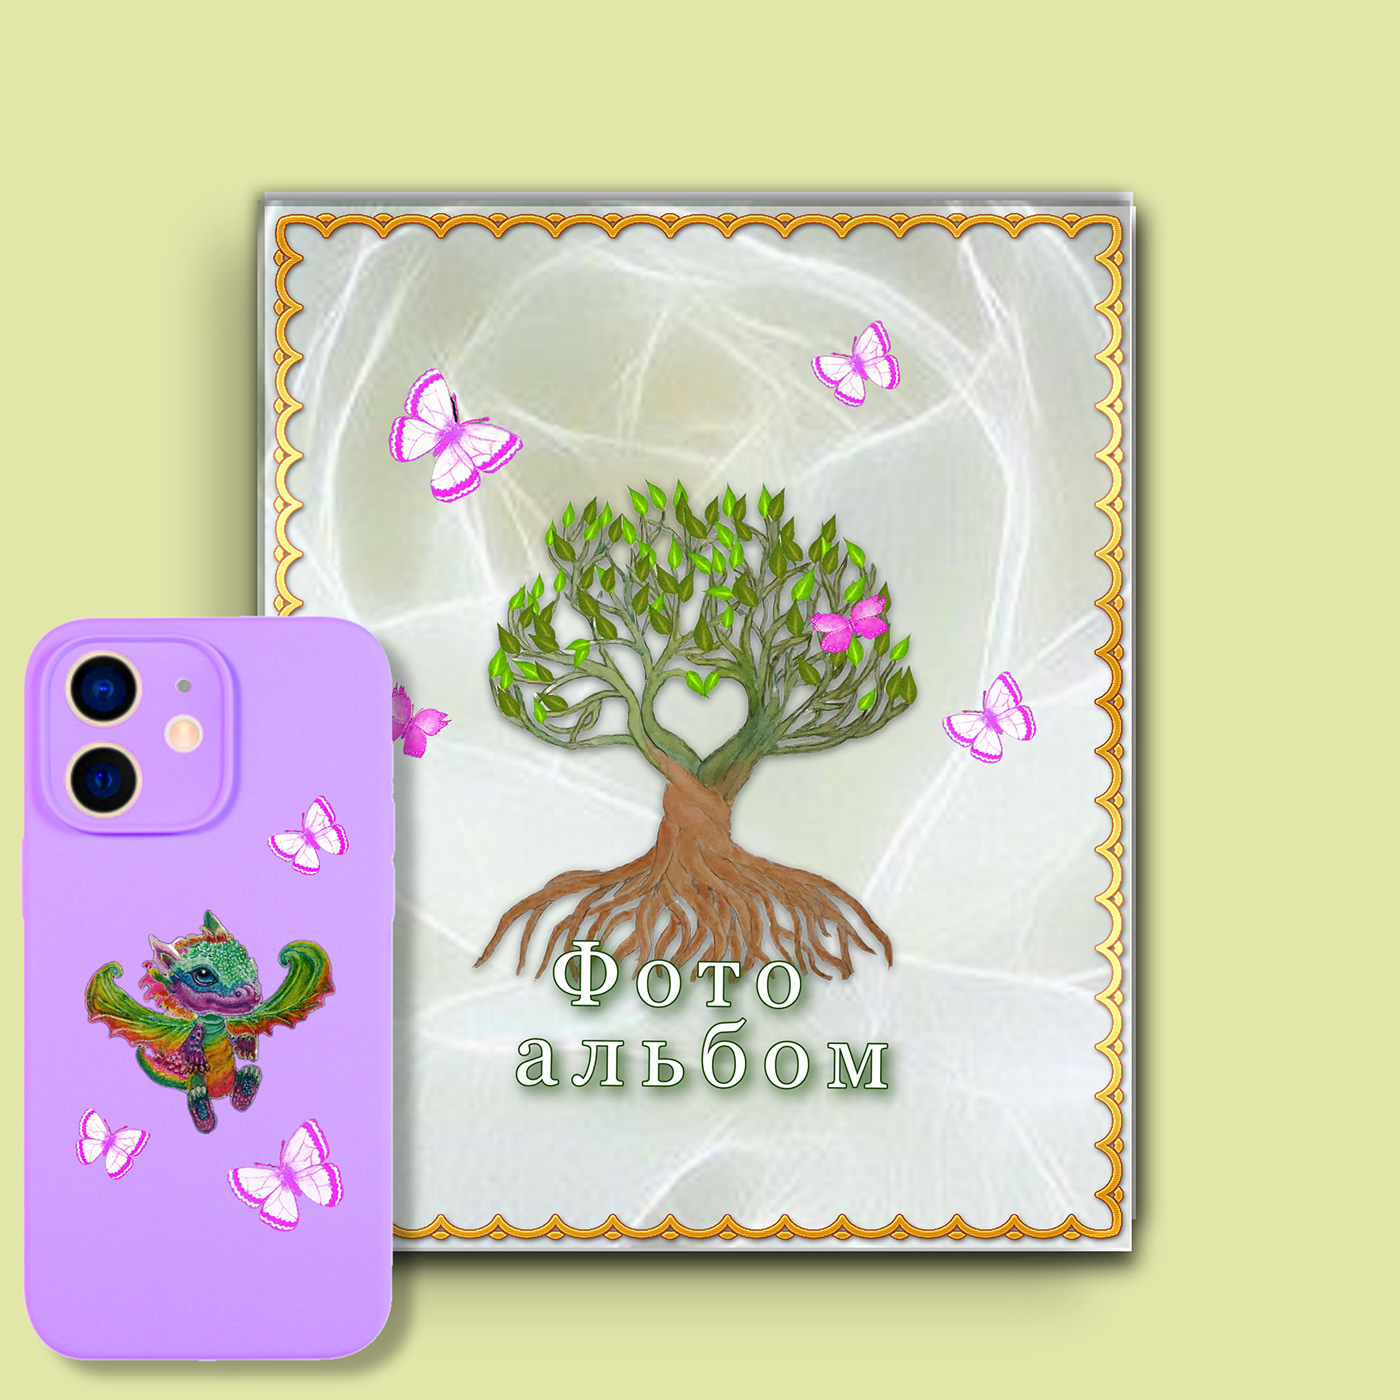 Gift design for photo album and phone case